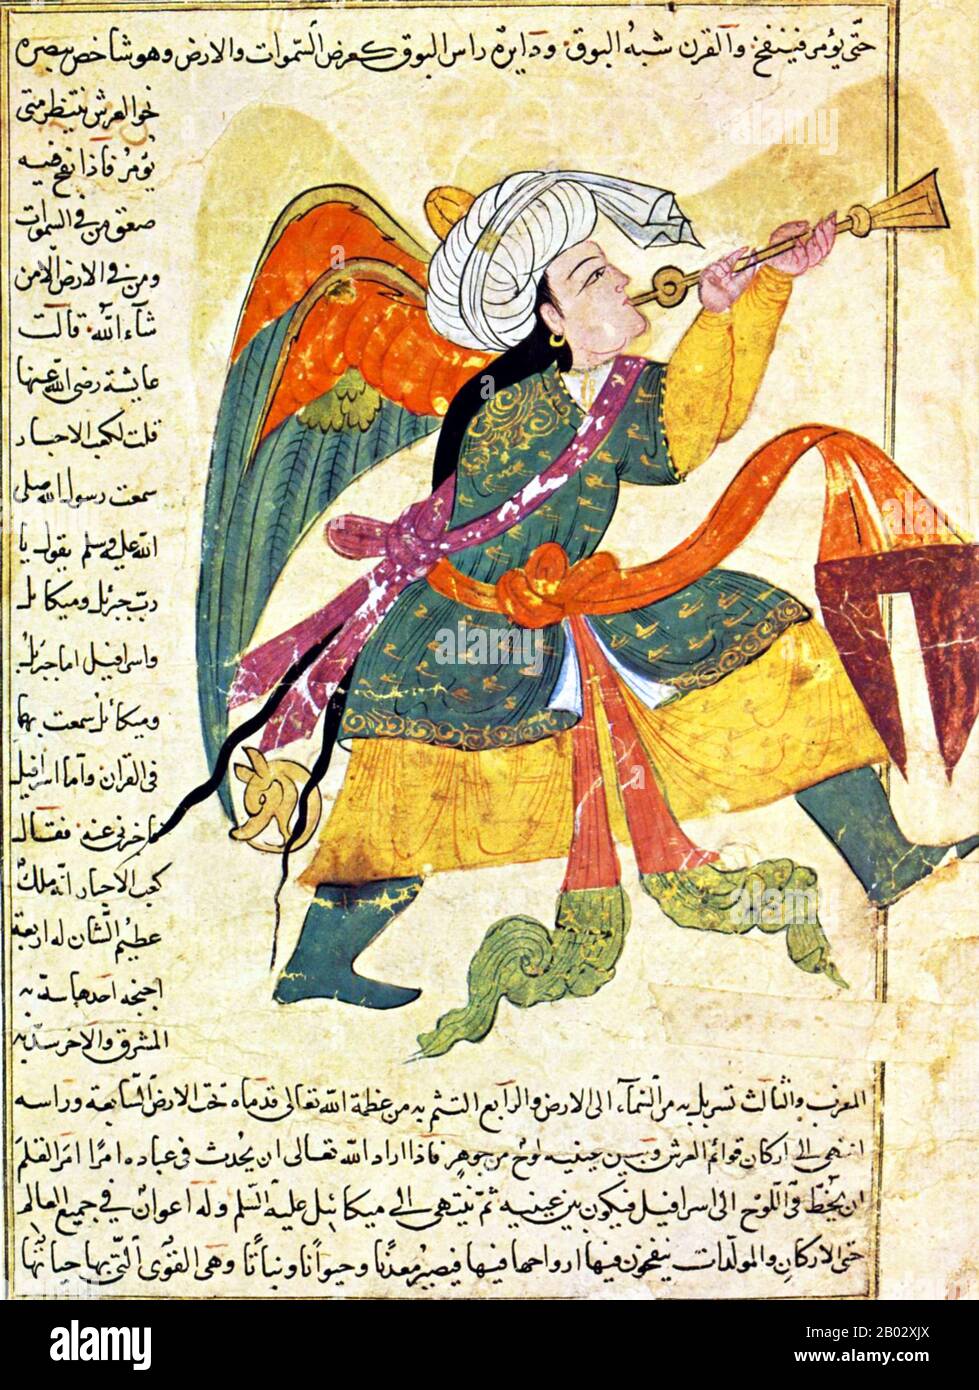 Abu Yahya Zakariya' ibn Muhammad al-Qazwini (born 1203 - died 1283), was a Persian physician, astronomer, geographer and proto-science fiction writer.  Born in the Persian town of Qazvin, he was descended from Anas ibn Malik, Zakariya' ibn Muhammad al-Qazwini served as legal expert and judge (qadhi) in several localities in Persia and at Baghdad. He travelled around in Mesopotamia and Syria, and finally entered the circle patronized by the governor of Baghdad, ‘Ata-Malik Juwayni (d. 1283 CE). Stock Photo